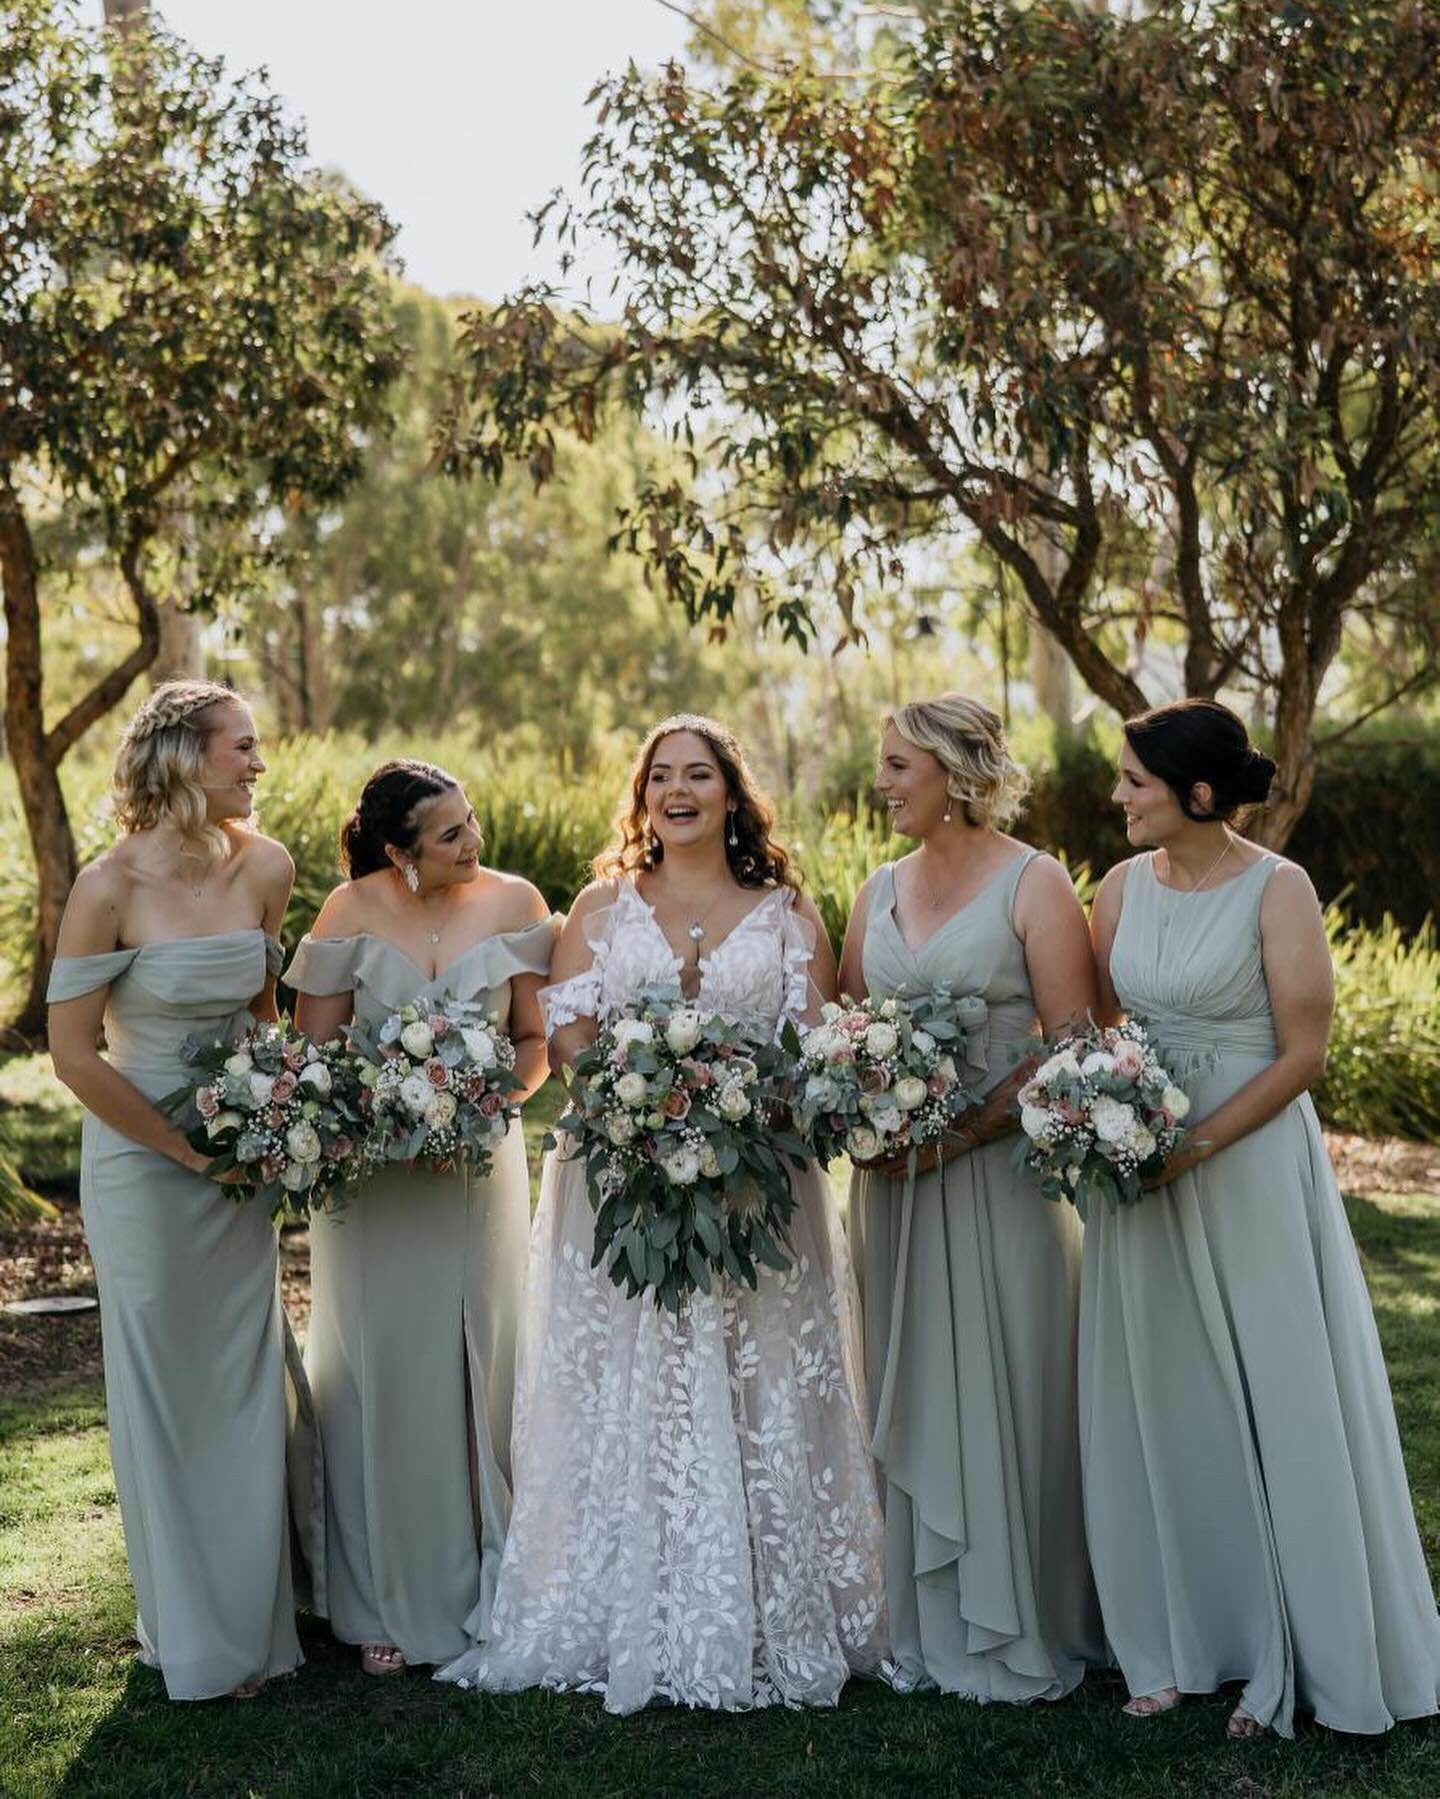 Kate&rsquo;s gorgeous wedding day! I was so honored to be chosen as her makeup artist for the day it was such a beautiful day ☀️

💌 For all inquiries links are in my bio or send a DM 

Bride @kate_deith 
Hair @hairstylingbyclaire 
Photography @kayla